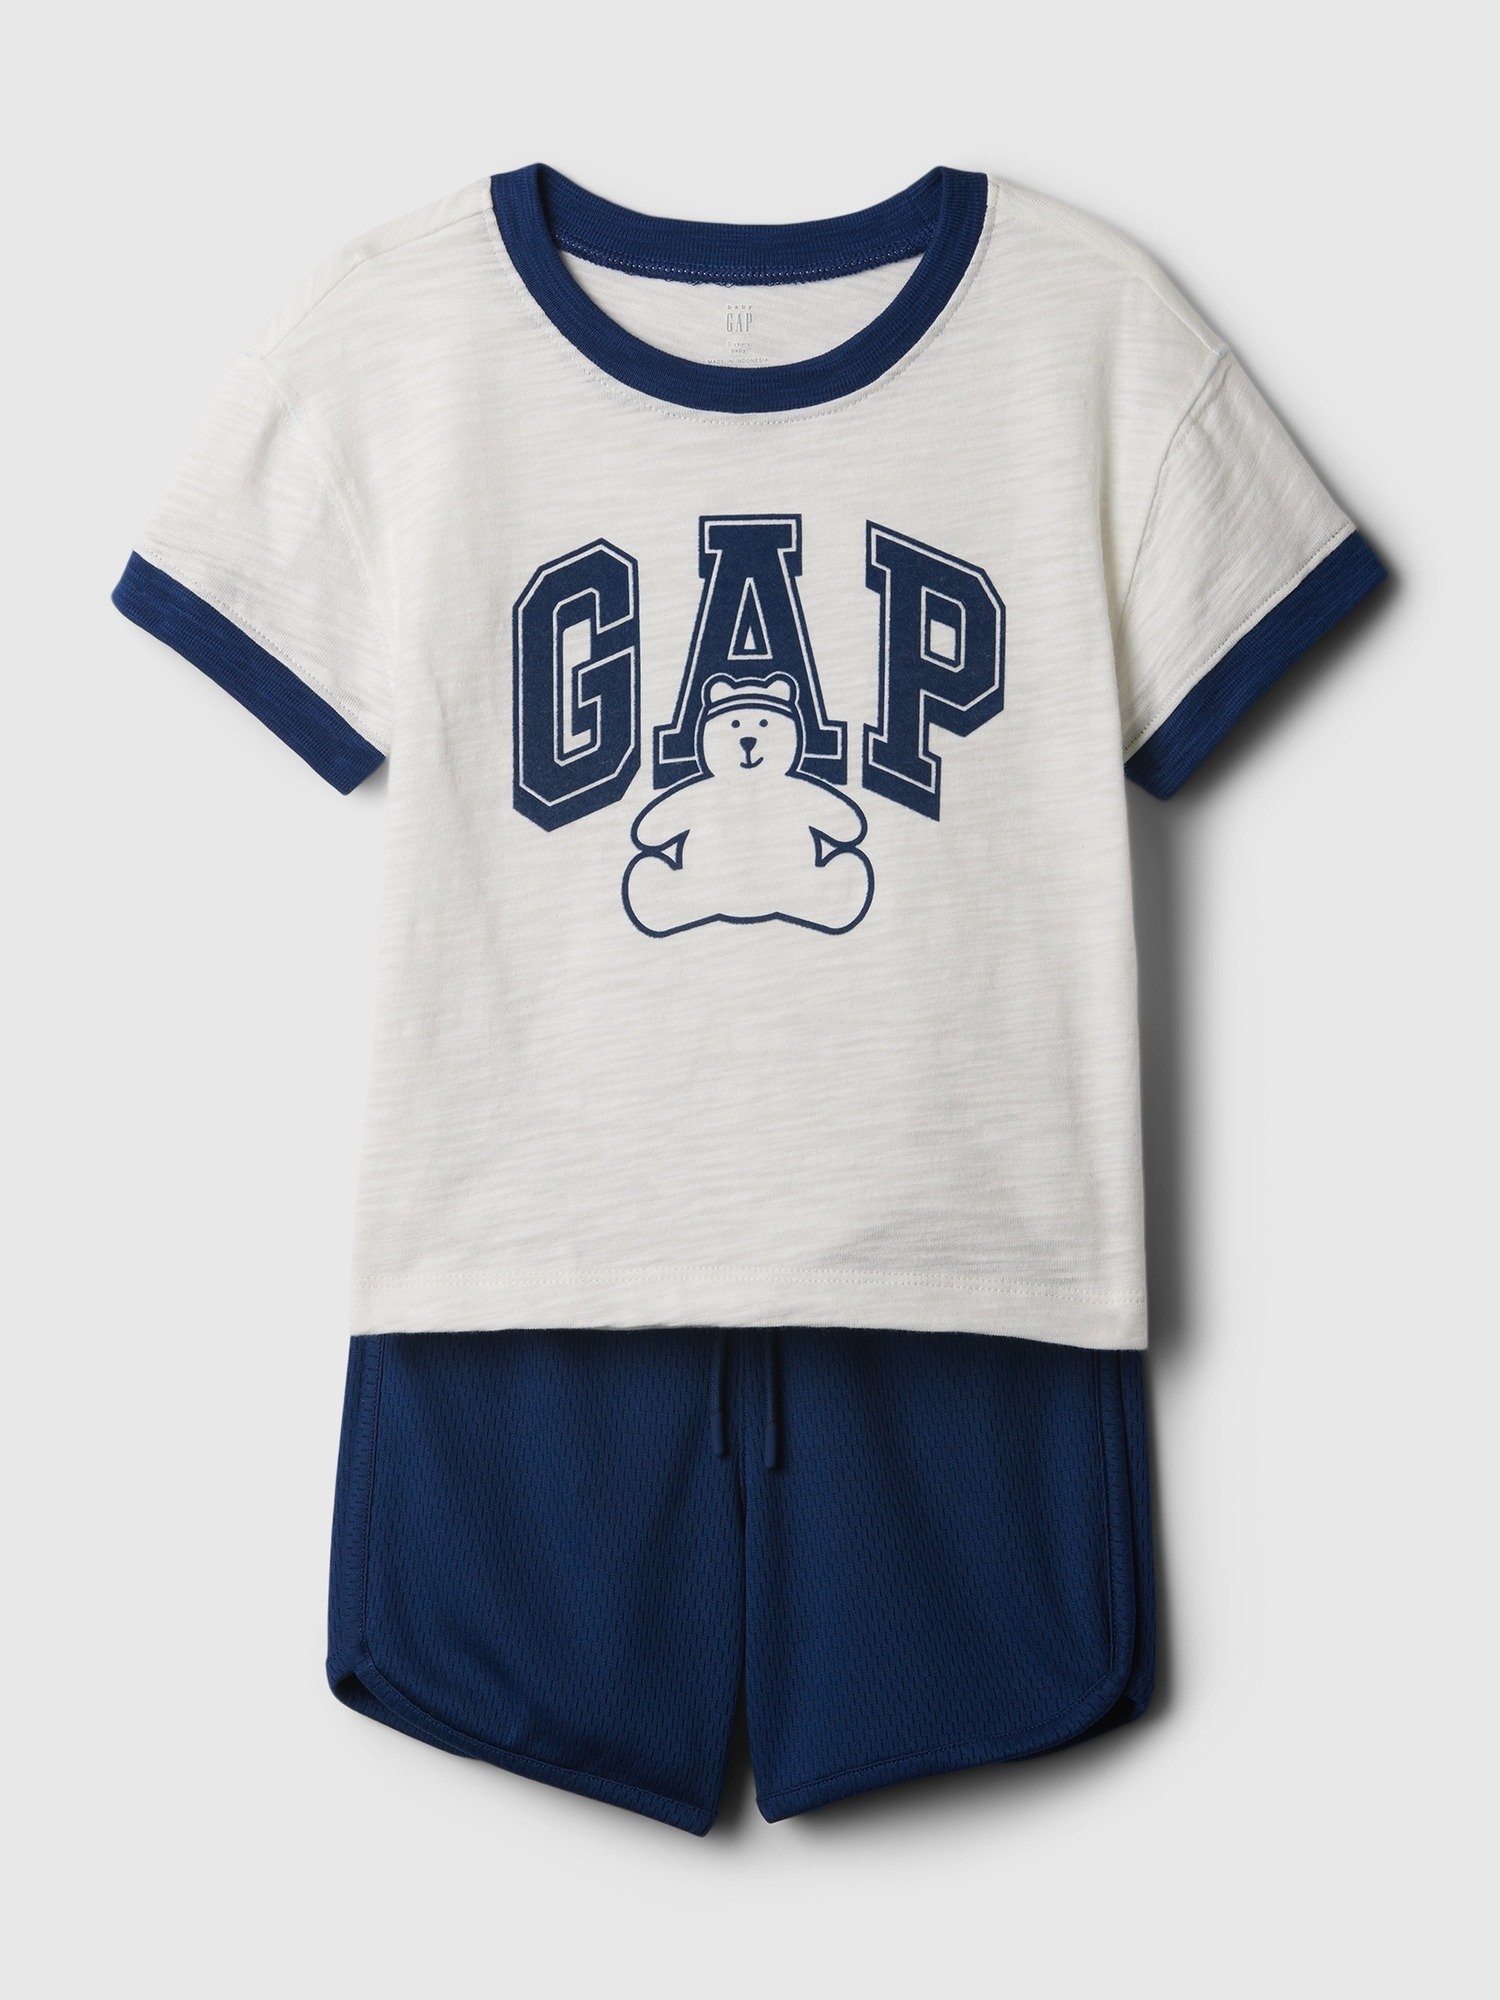 Gap Logo Mix and Match Outfit Set product image